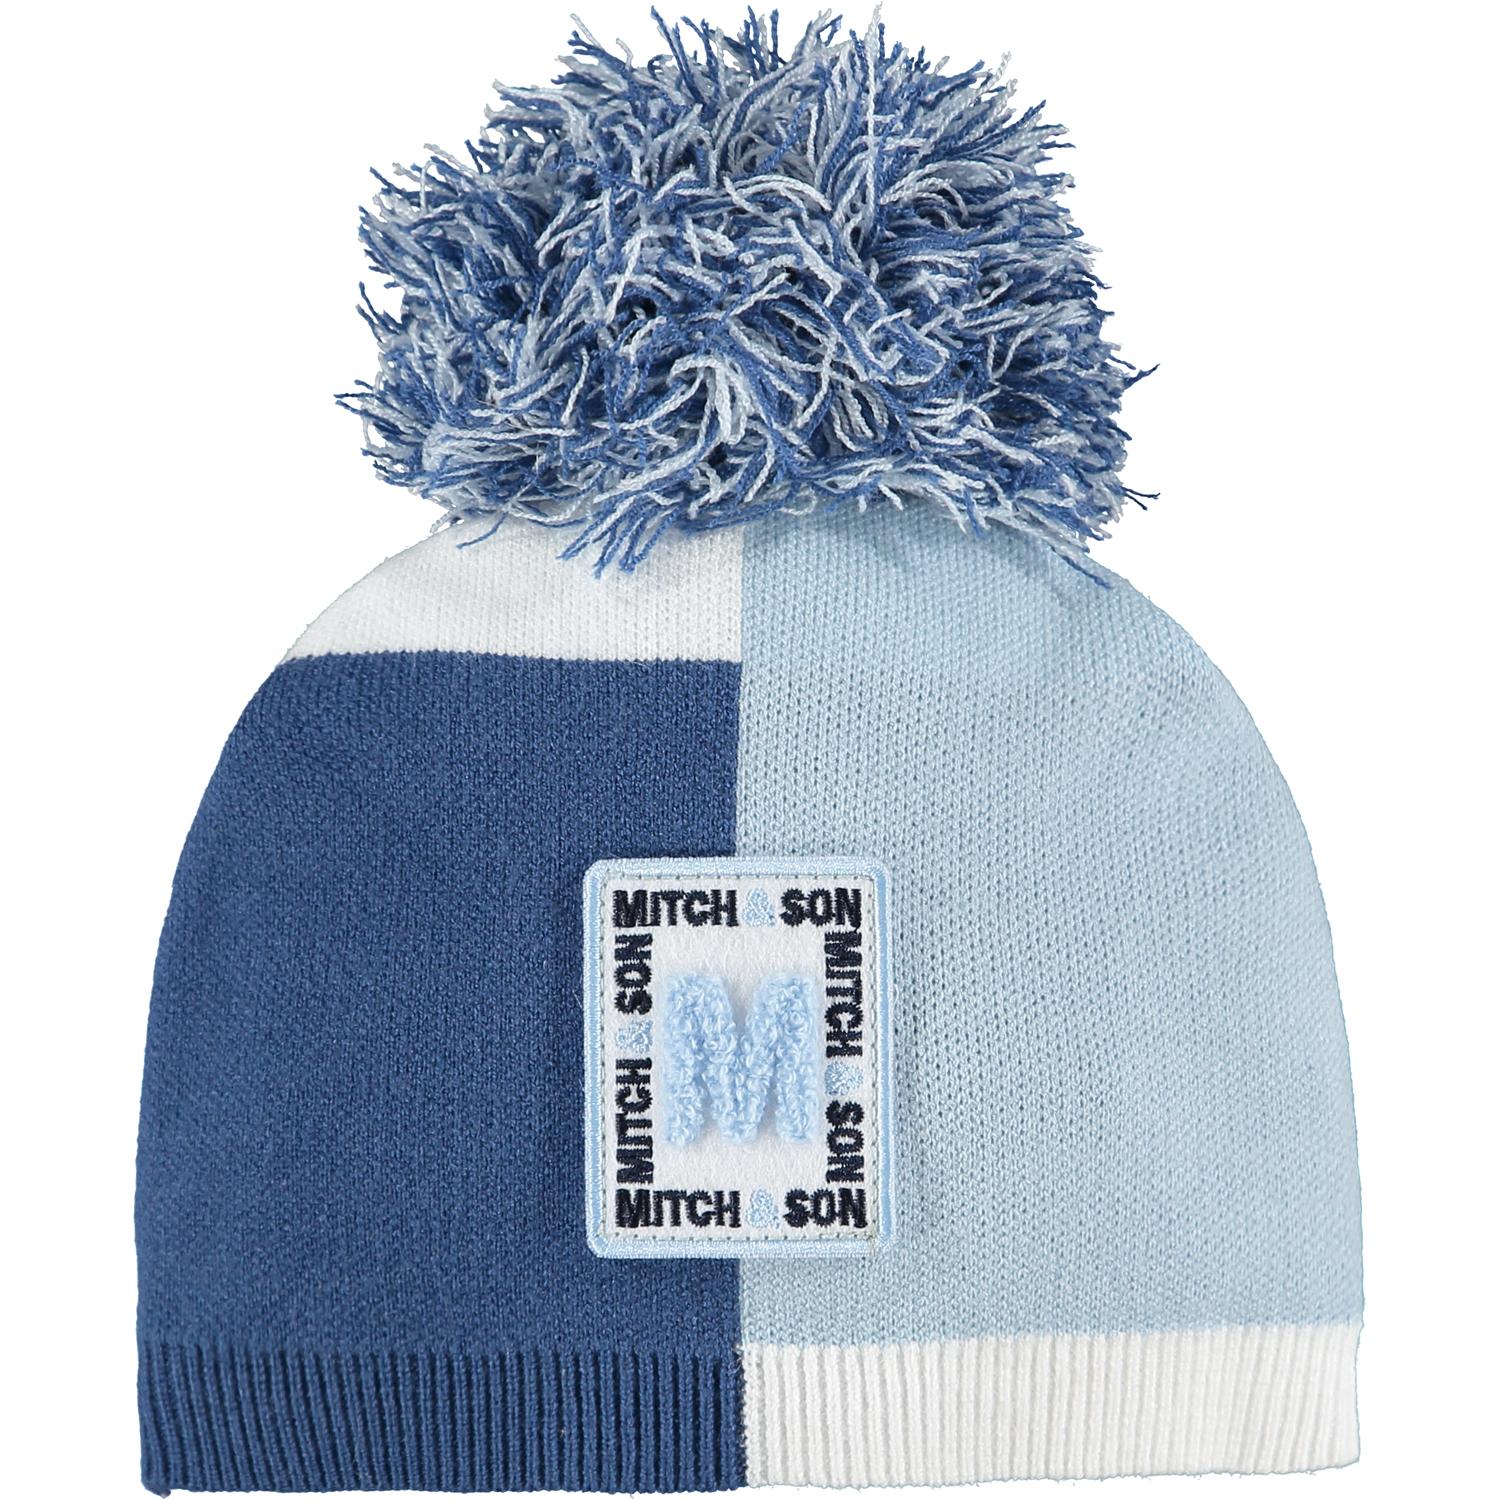 MITCH & SON - Colour Block Knitted Hat - Blue